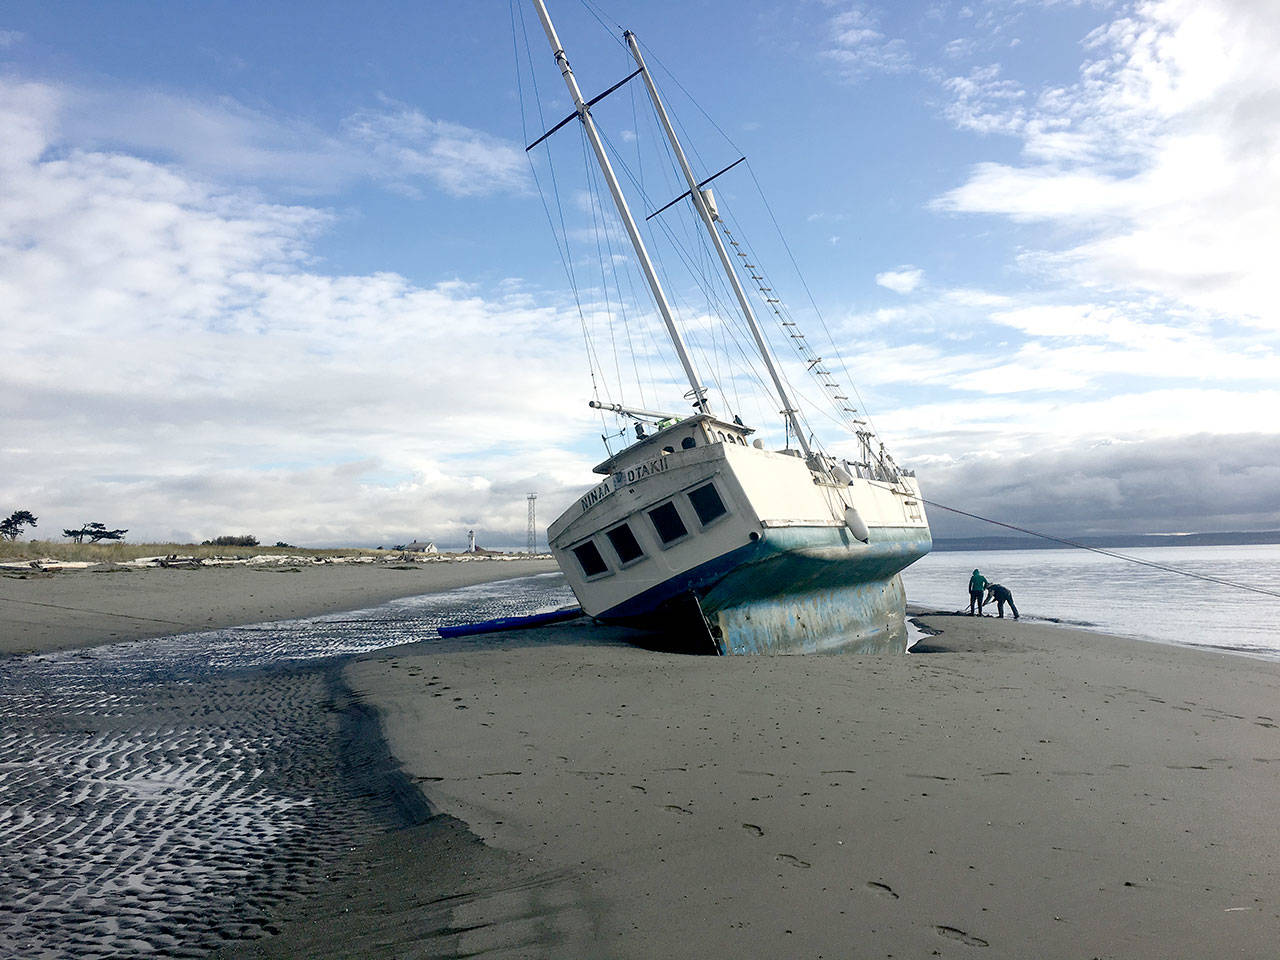 The schooner Nina Otaki was high and dry on the beach at Fort Worden State Park after being blown ashore Sept. 17. (Erik Wennstrom)